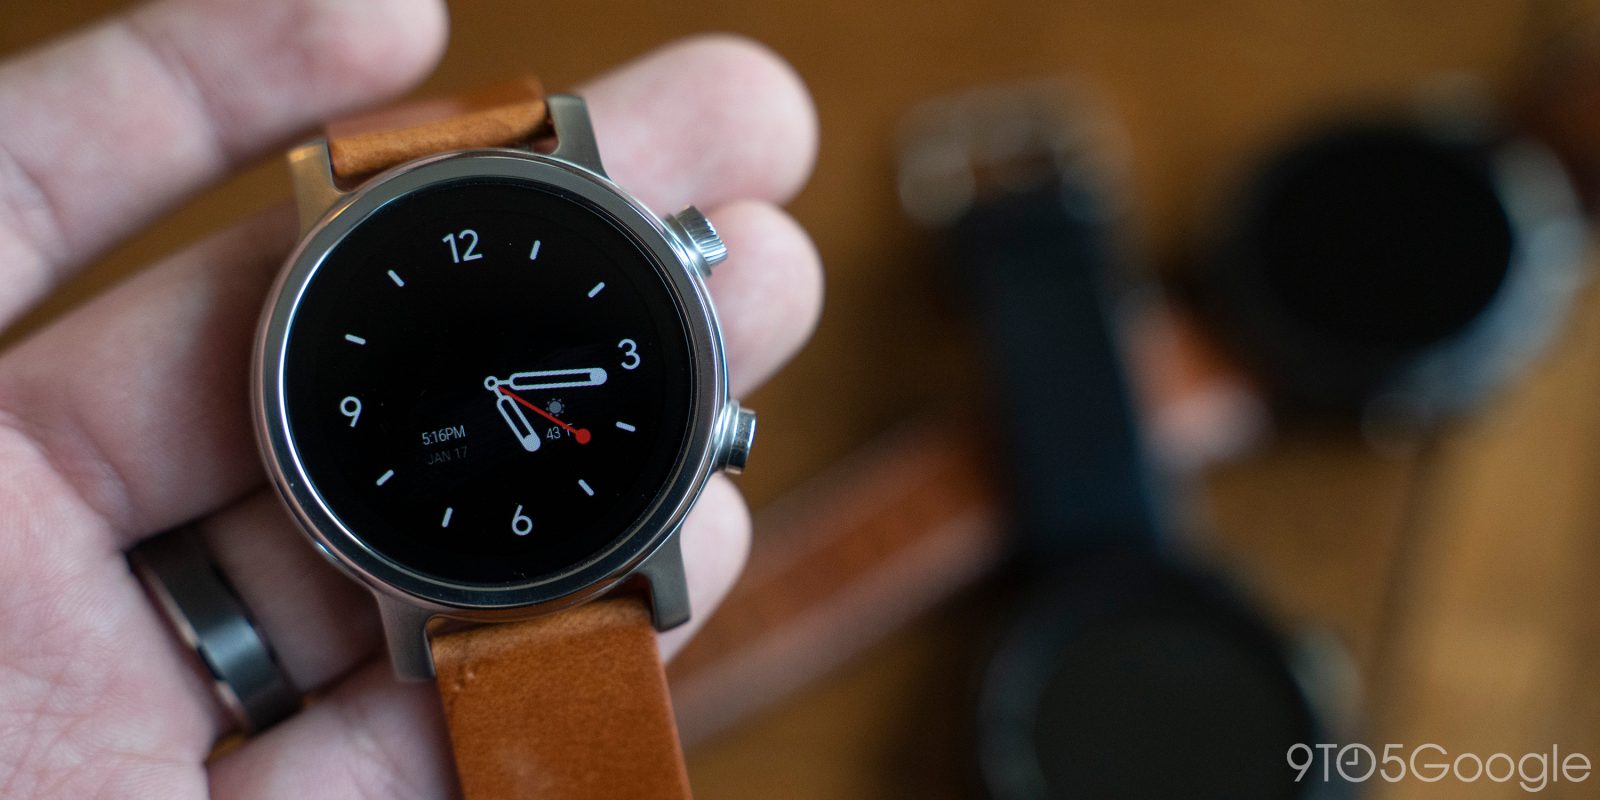 Wear OS watch faces